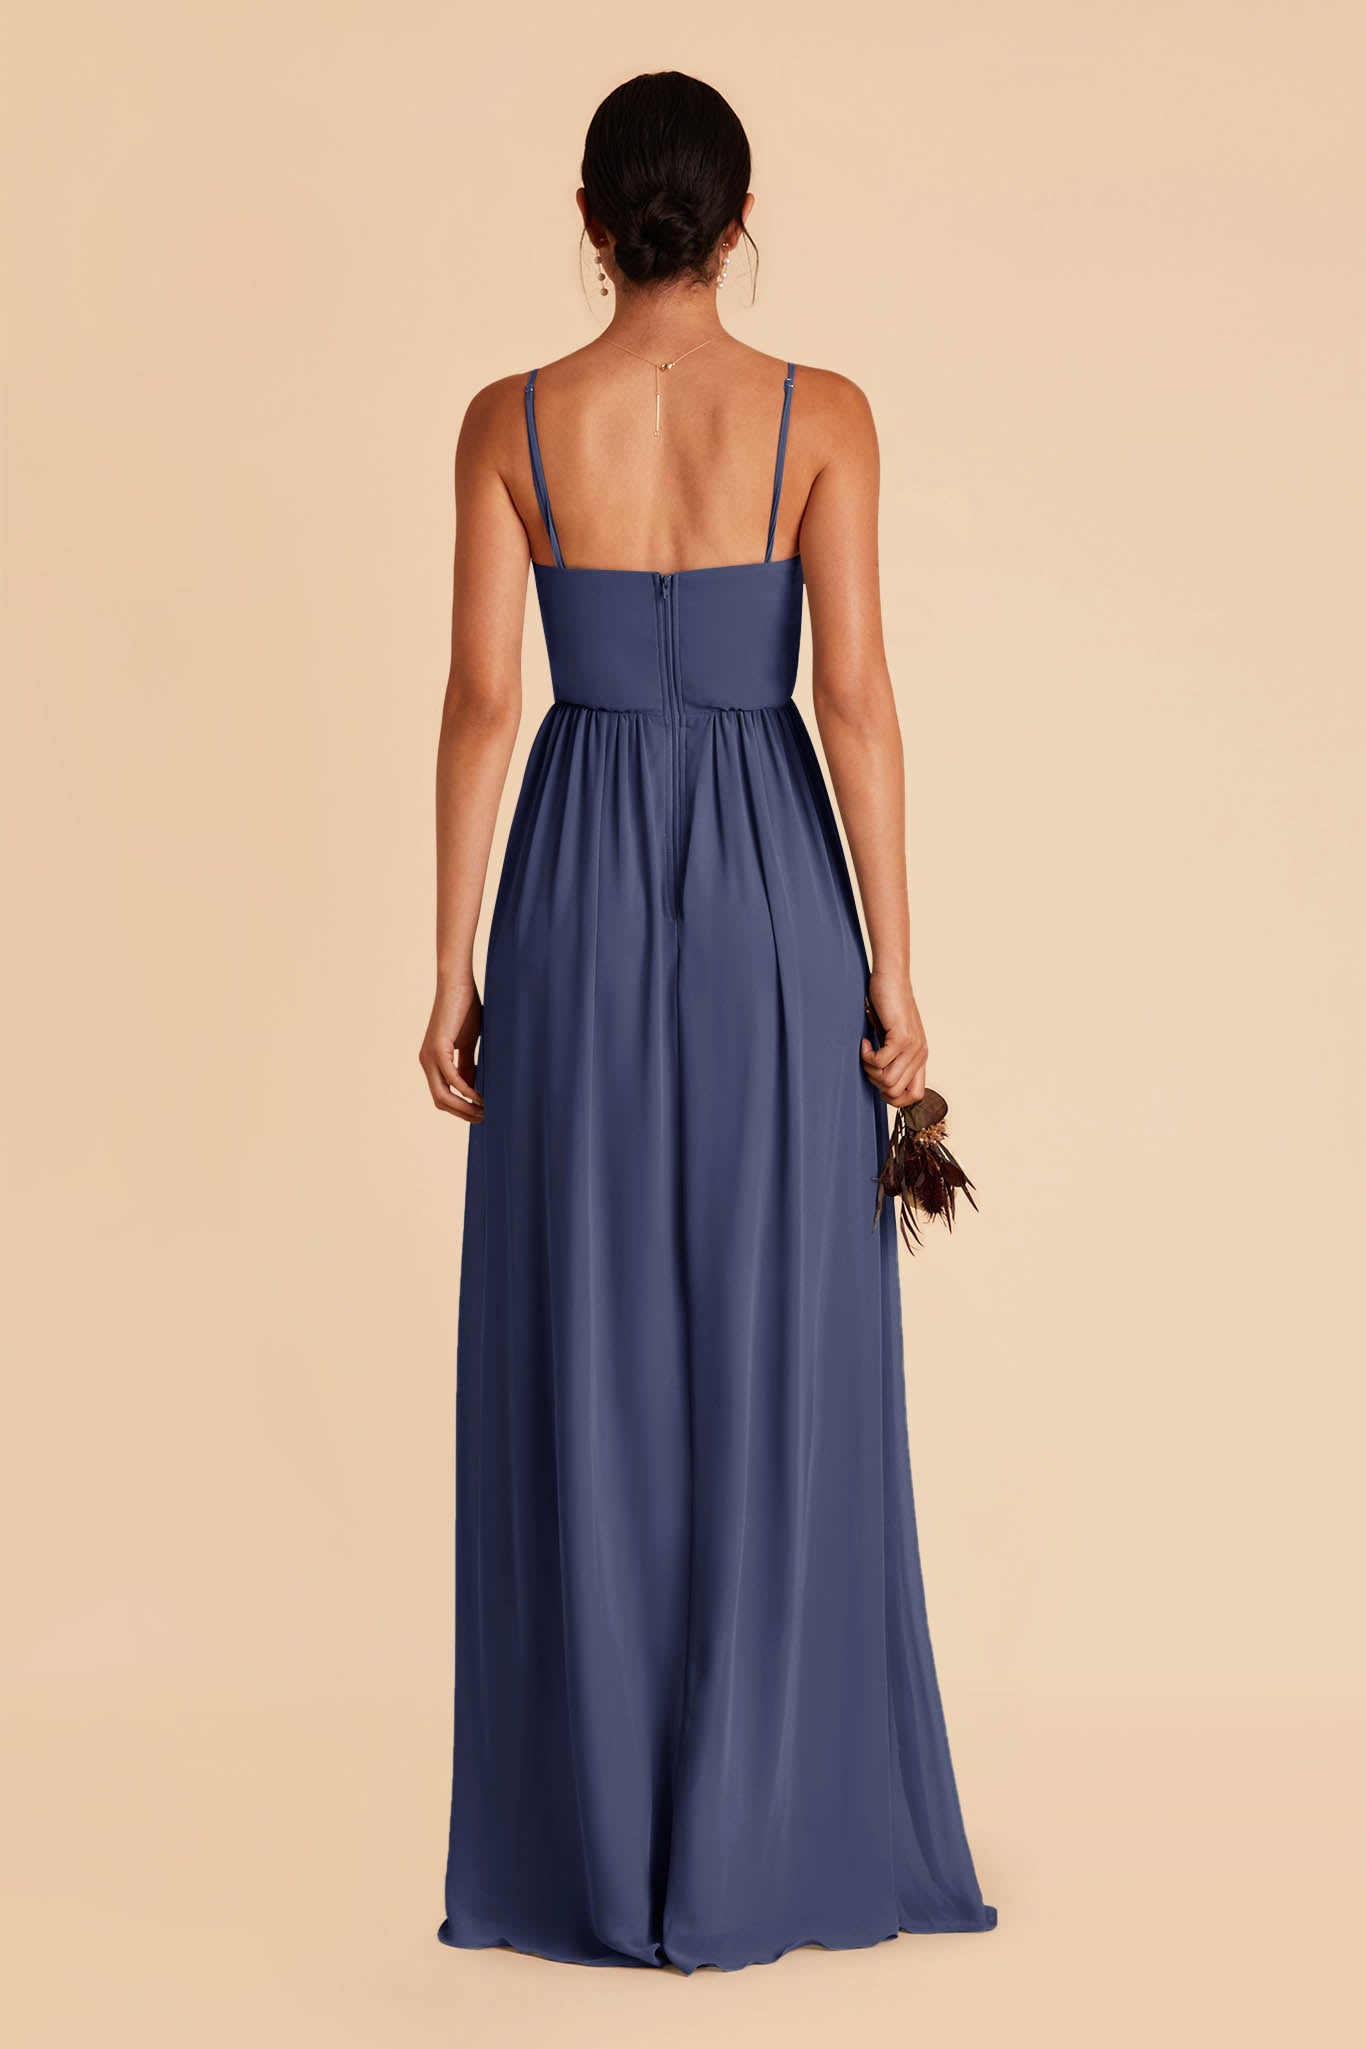 Slate Blue August Convertible Dress by Birdy Grey